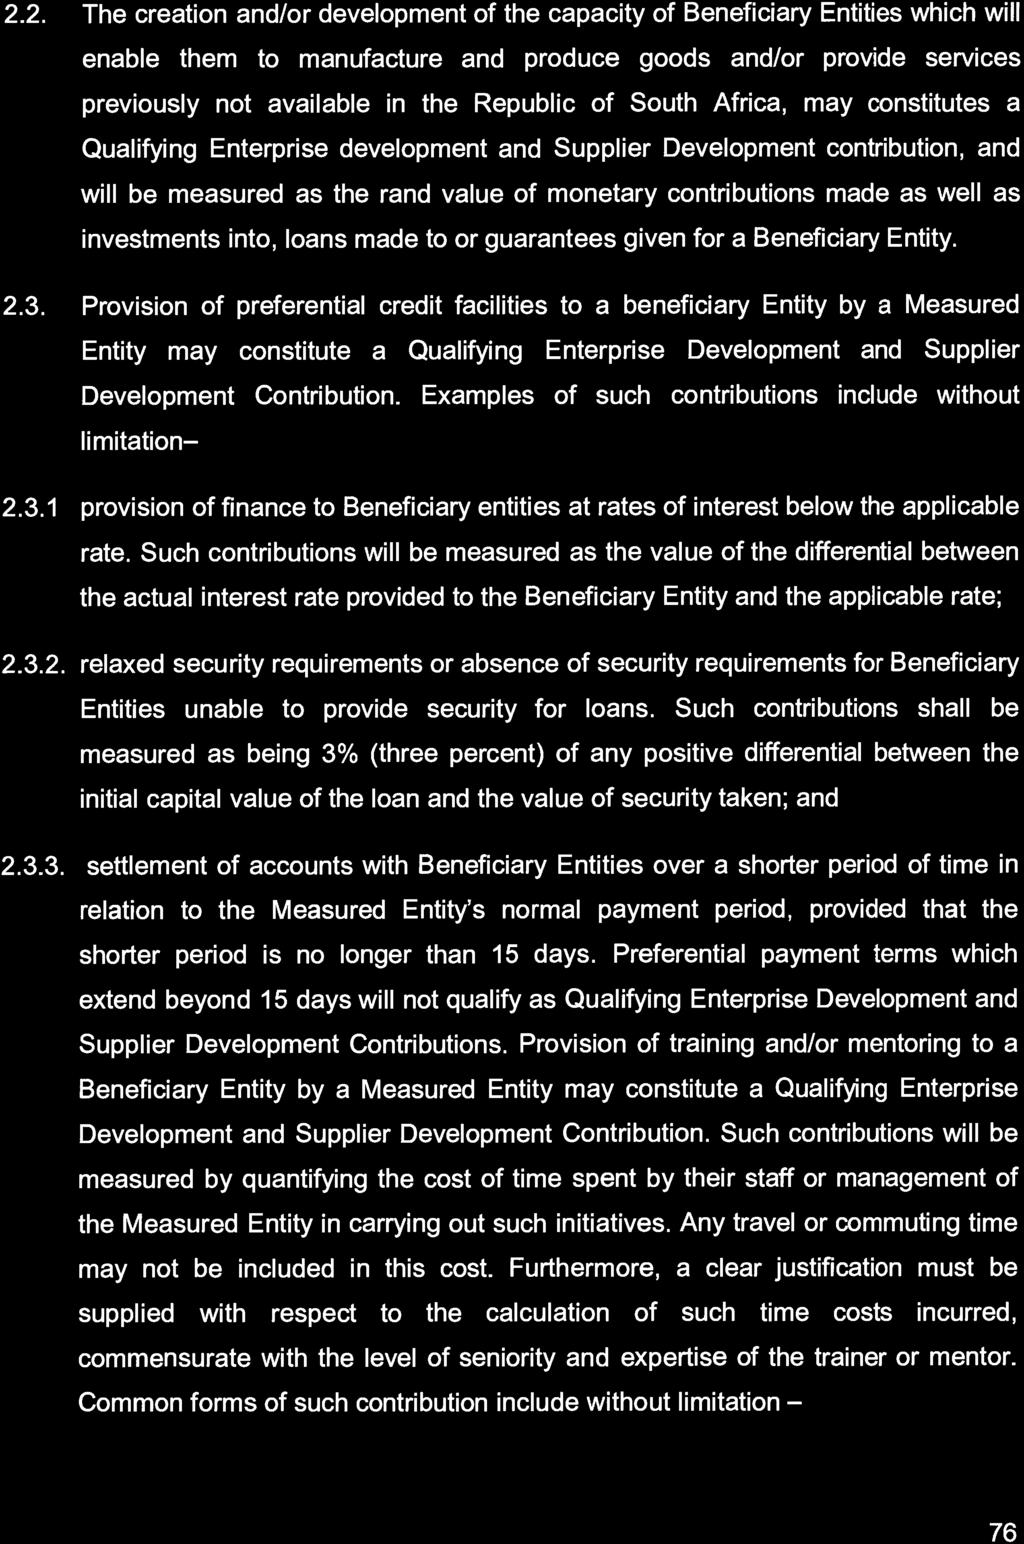 220 No. 41024 GOVERNMENT GAZETTE, 4 AUGUST 2017 2.2. The creation and/or development of the capacity of Beneficiary Entities which will enable them to manufacture and produce goods and /or provide